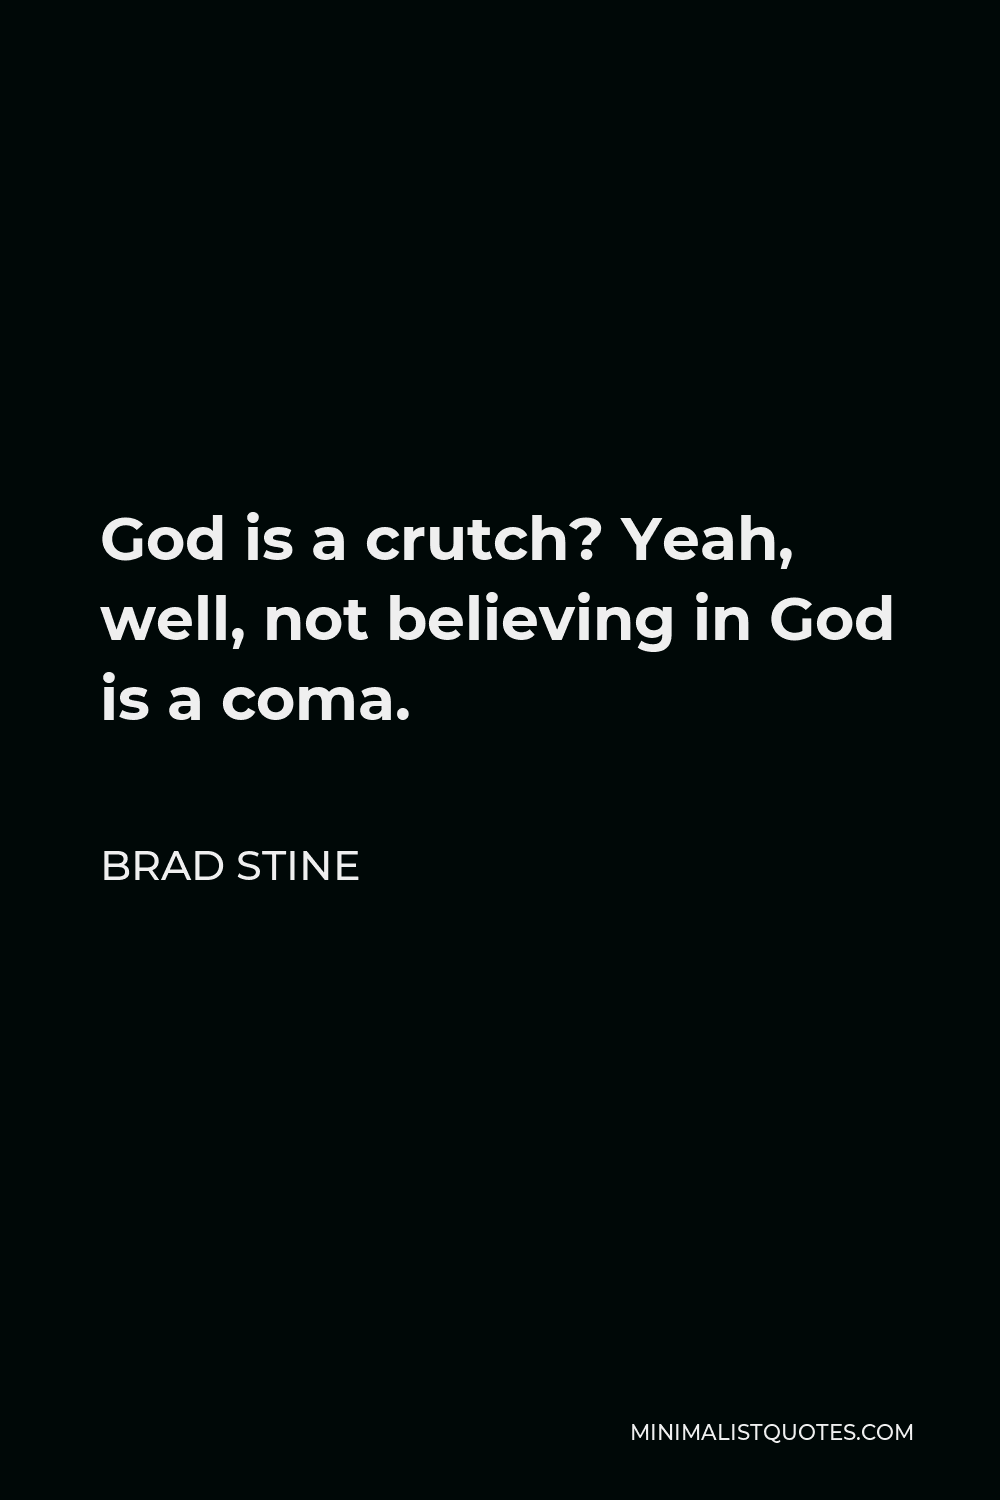 Brad Stine Quote - God is a crutch? Yeah, well, not believing in God is a coma.